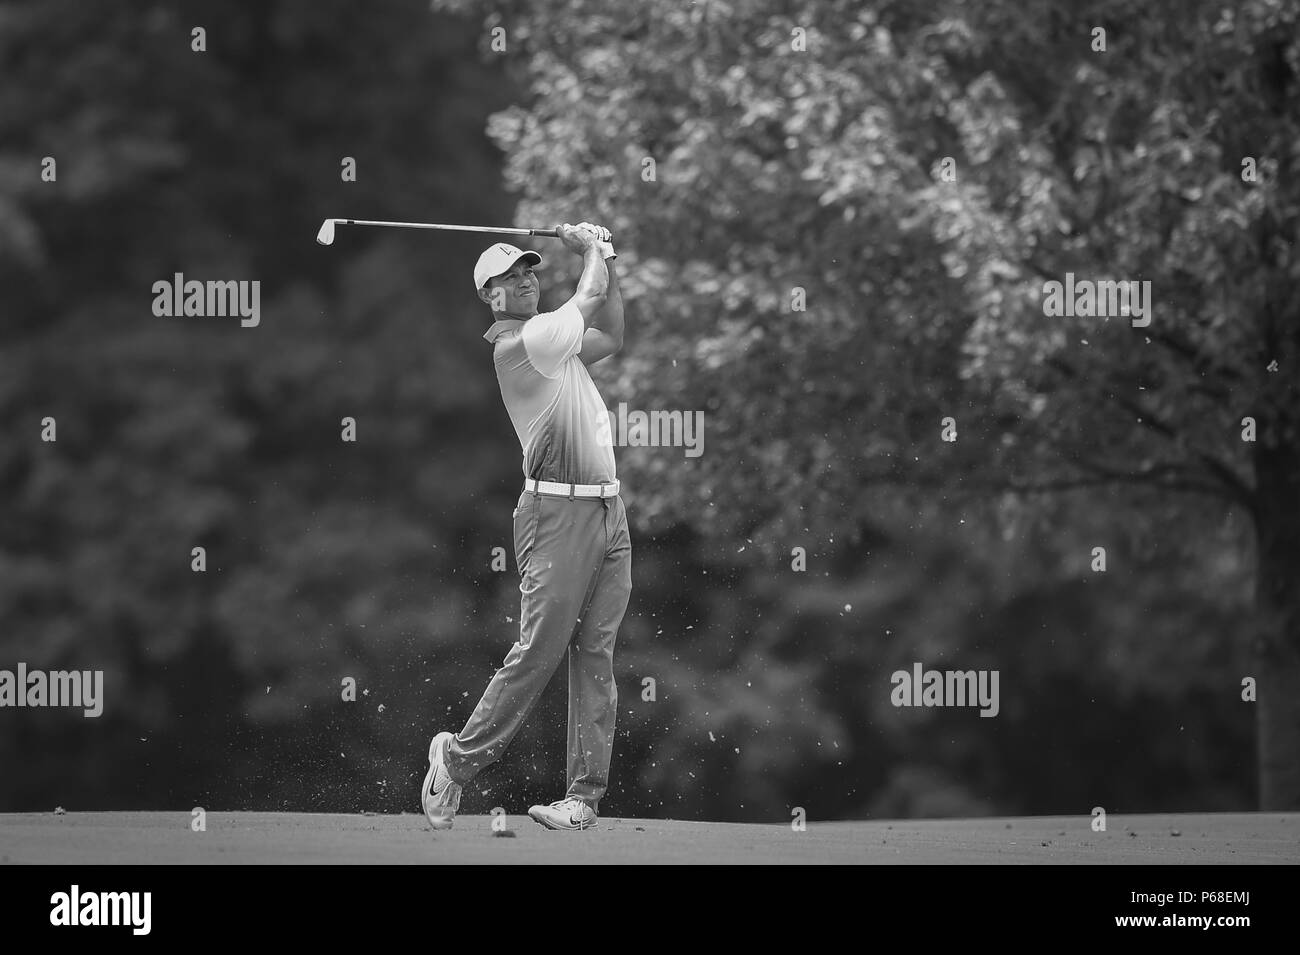 Potomac MD, USA. 28th June, 2018. A black and white photo of Tiger Woods (USA) hits his second shot from the center of the fairway at the second hole during the opening round at the 2018 Quicken Loans National at the Tournament Players Club in Potomac MD. Credit: Cal Sport Media/Alamy Live News Stock Photo